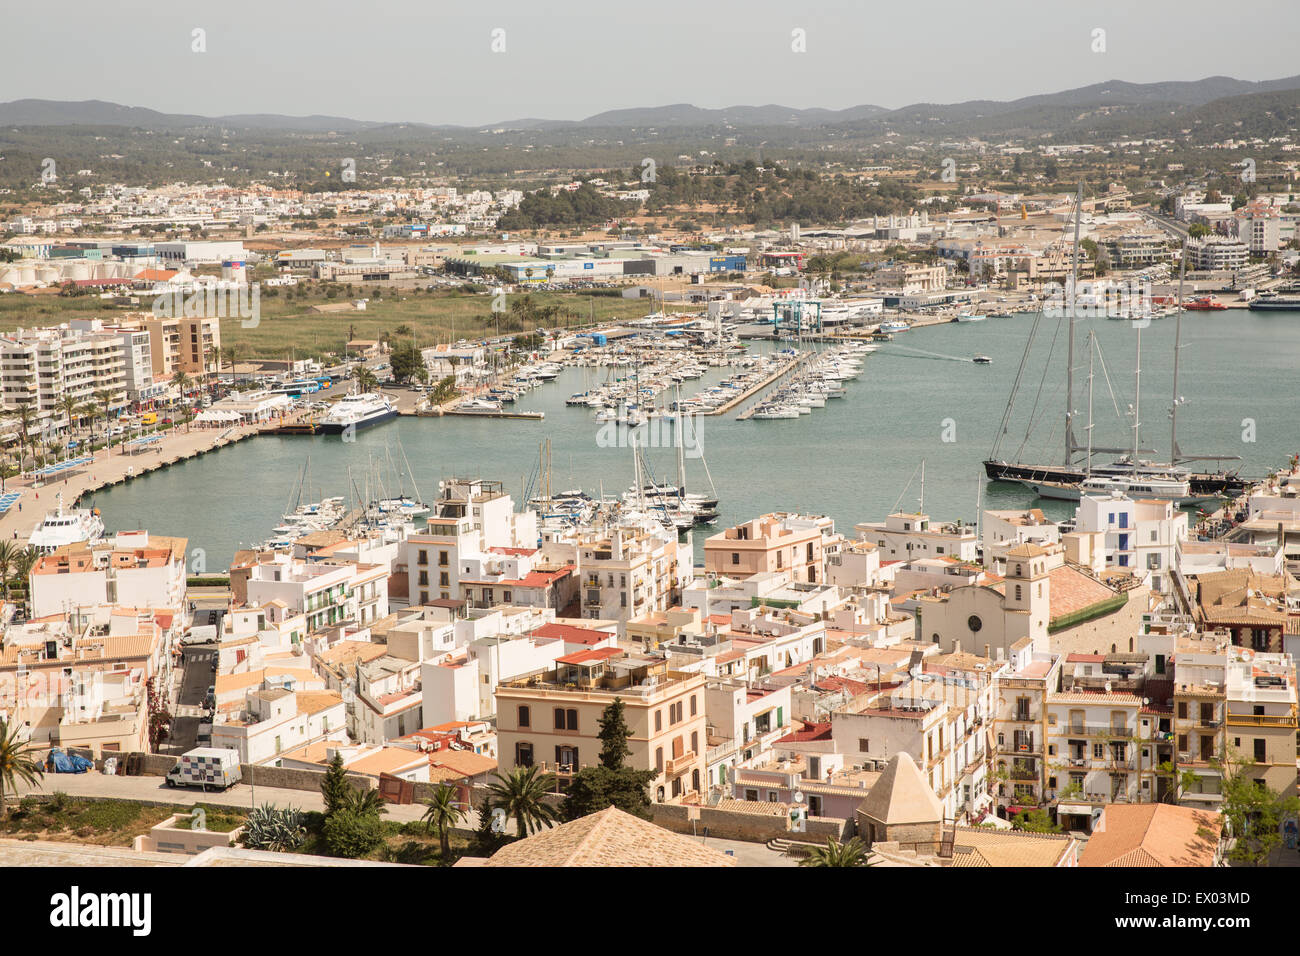 View of old town and harbor, Ibiza, Spain Stock Photo